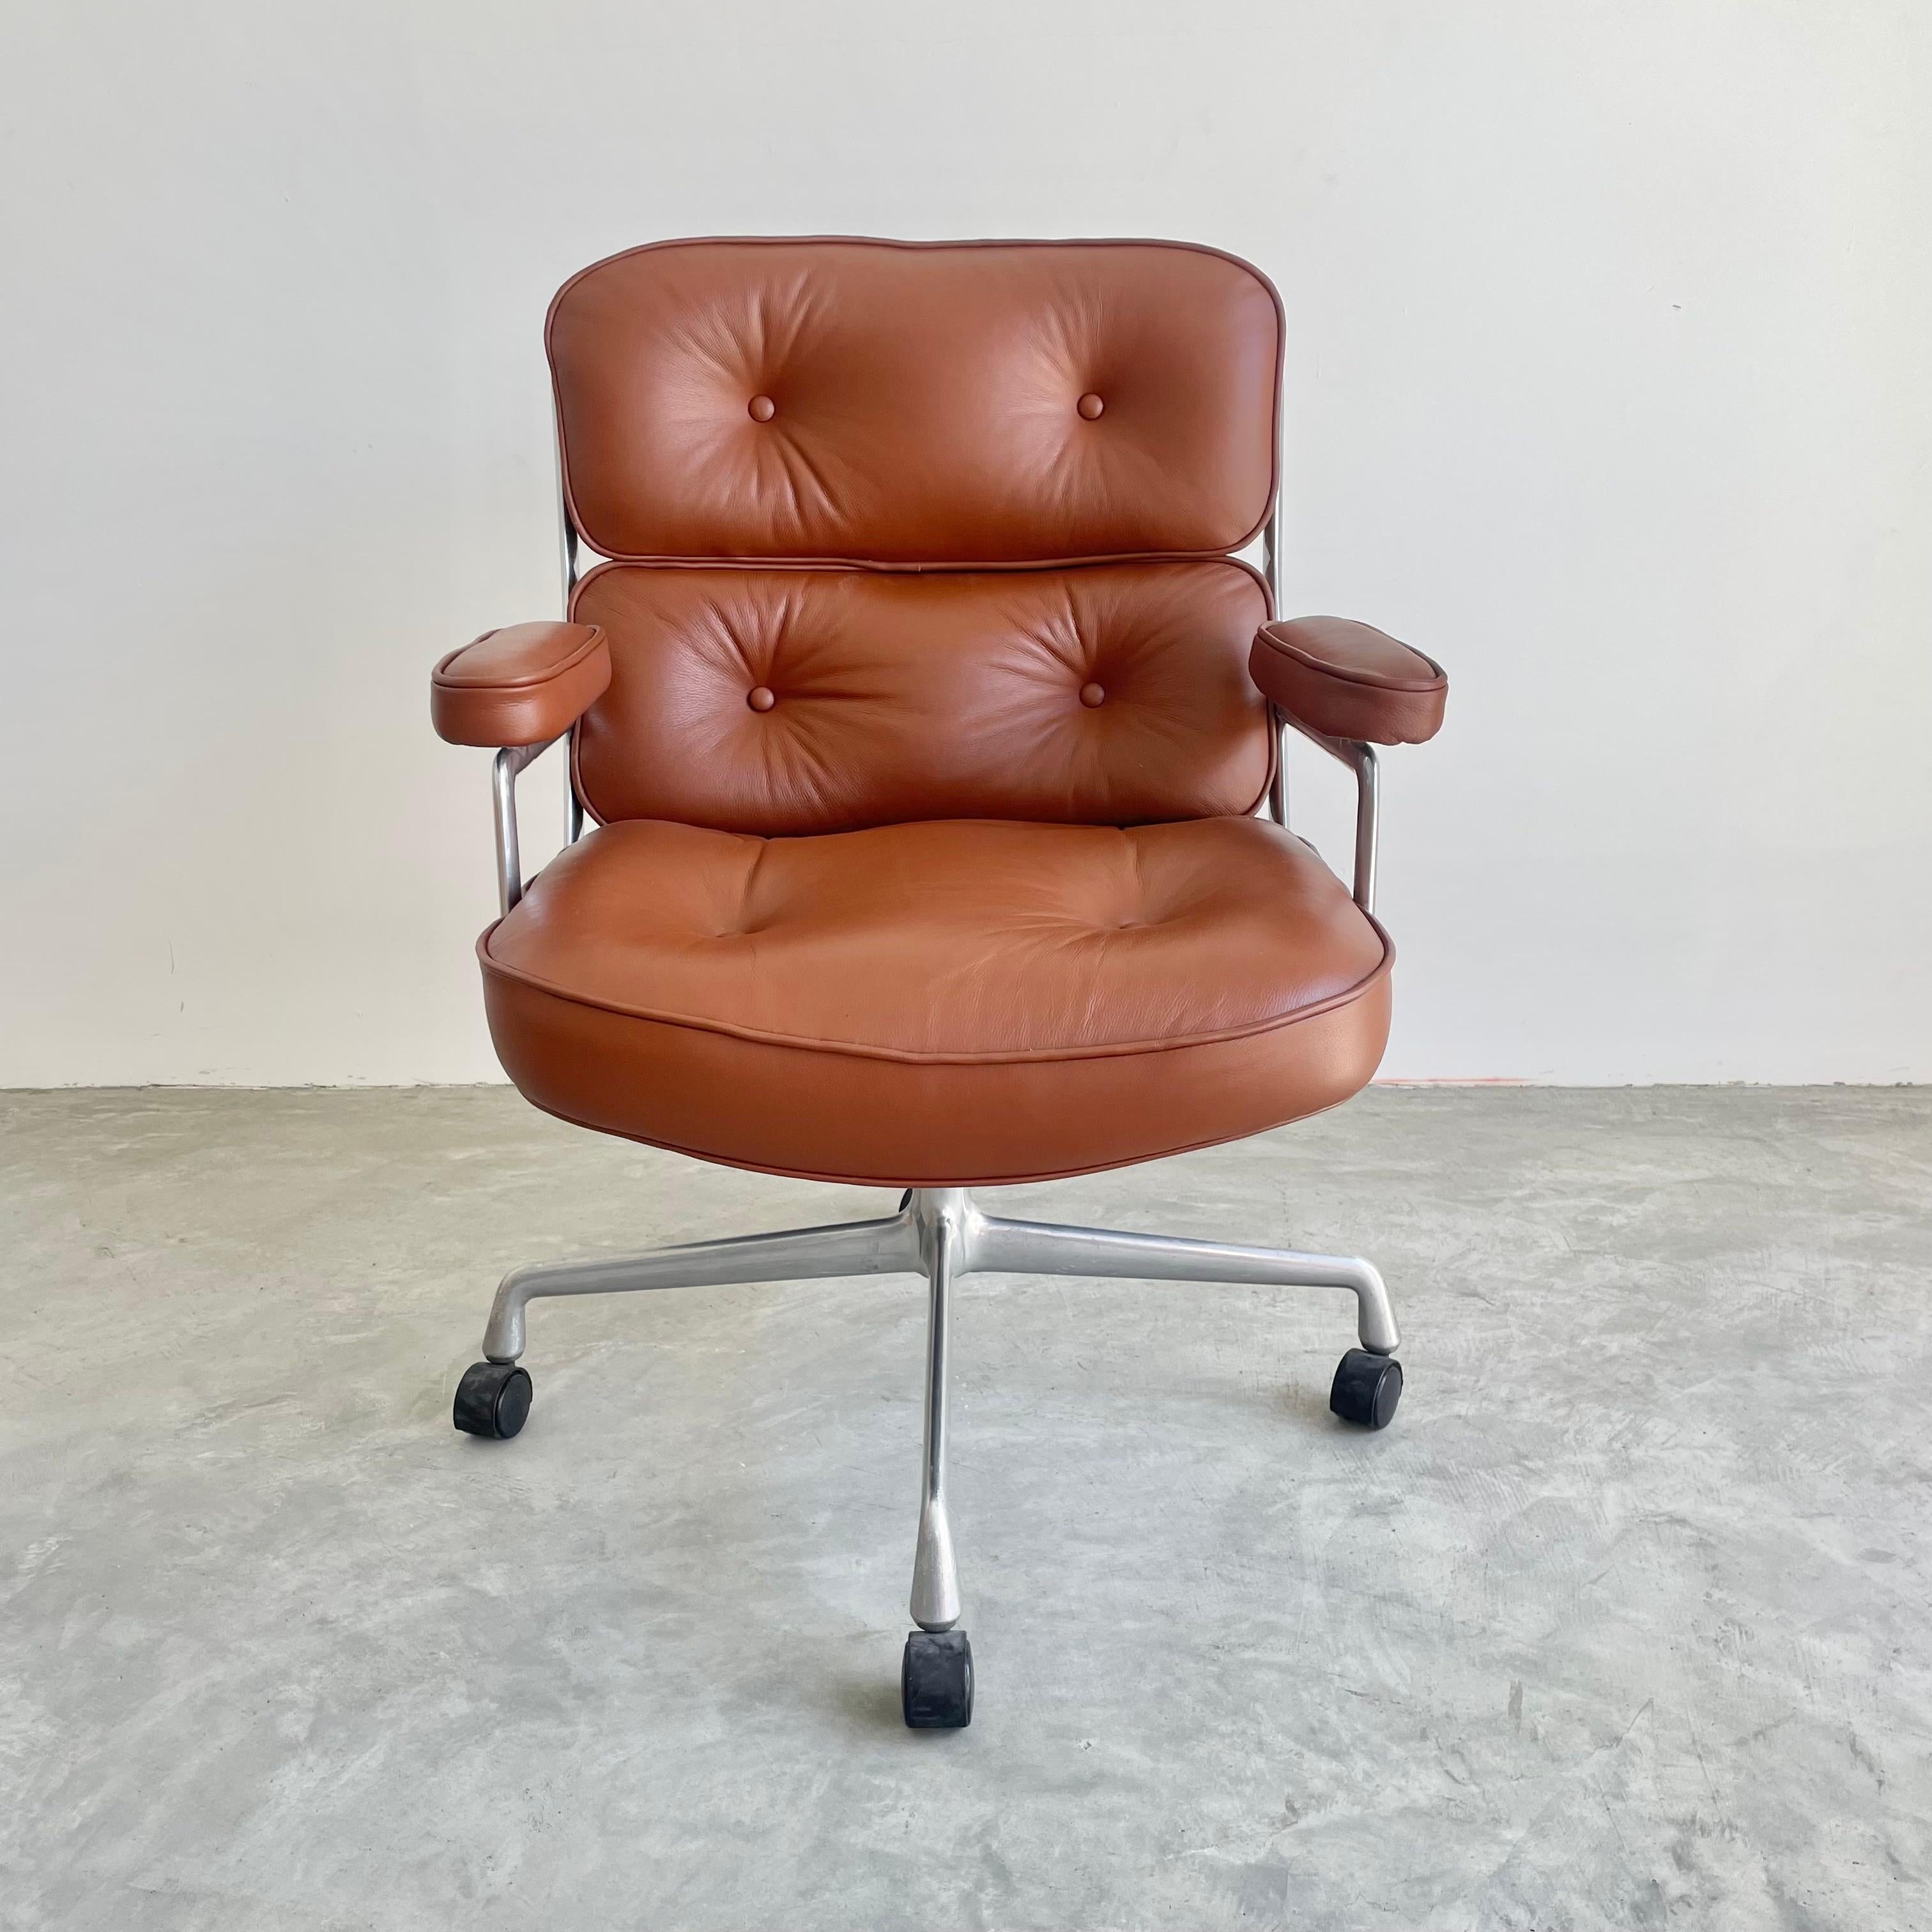 Classic Eames Time Life chair for Herman Miller in brown leather with a polished aluminum frame and legs. Originally designed in 1960 by Charles and Ray Eames for use in the lobby of the Time Life building in New York. 

Recently re-upholstered in a